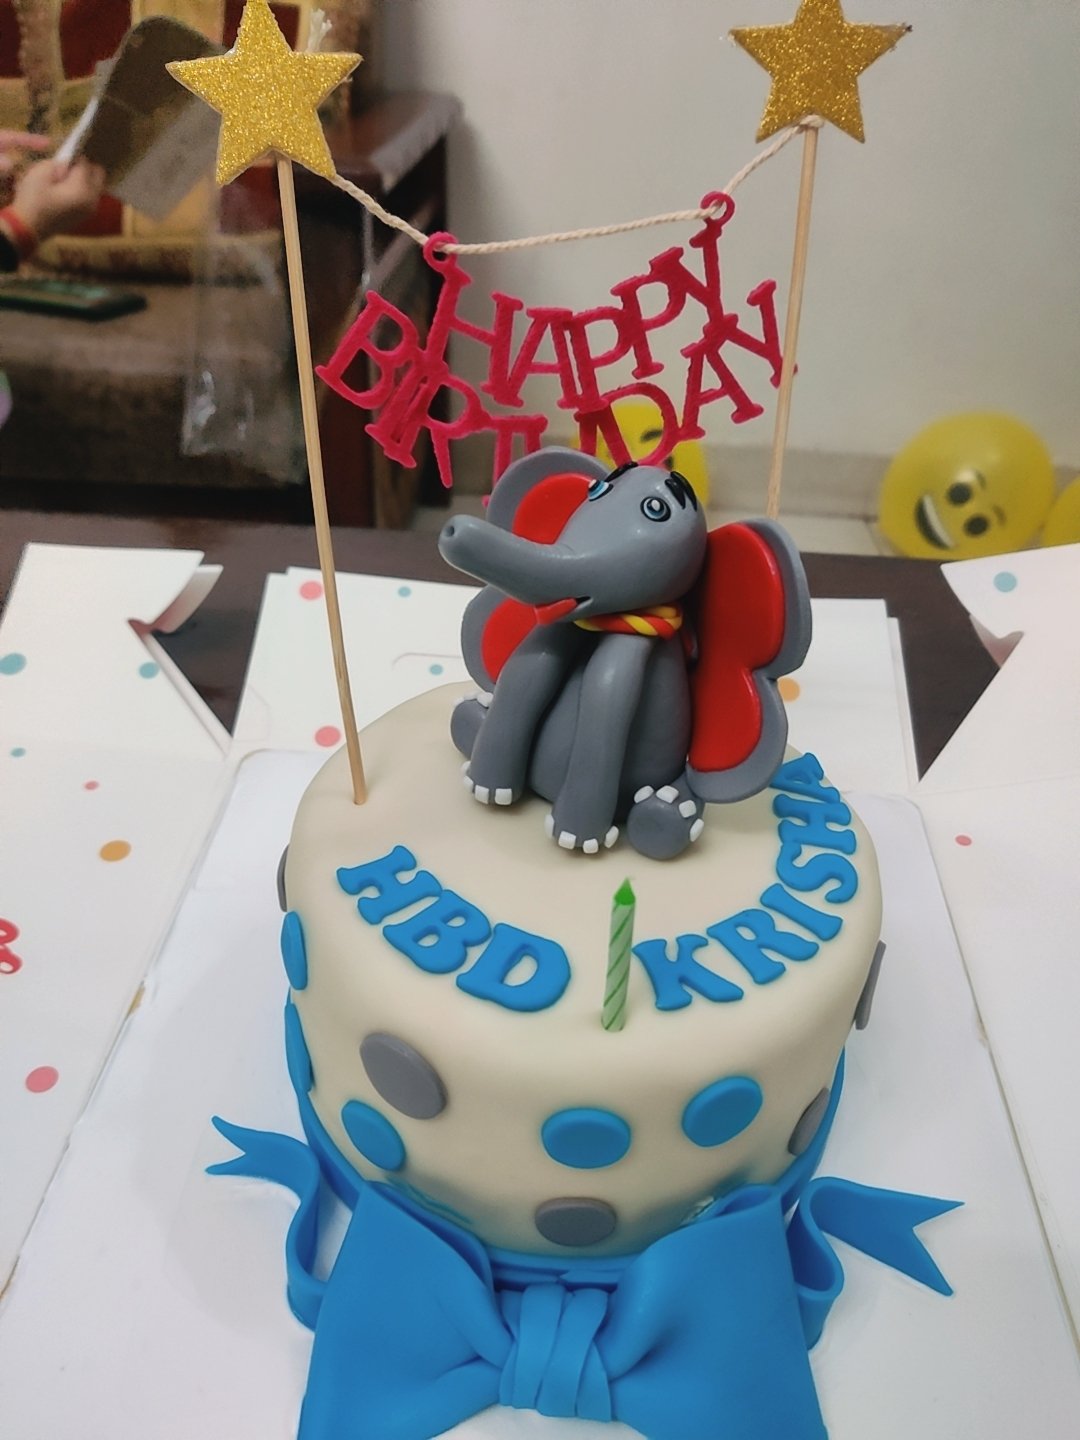 Ellie the Elephant Birthday Cake | Free Gift & Delivery